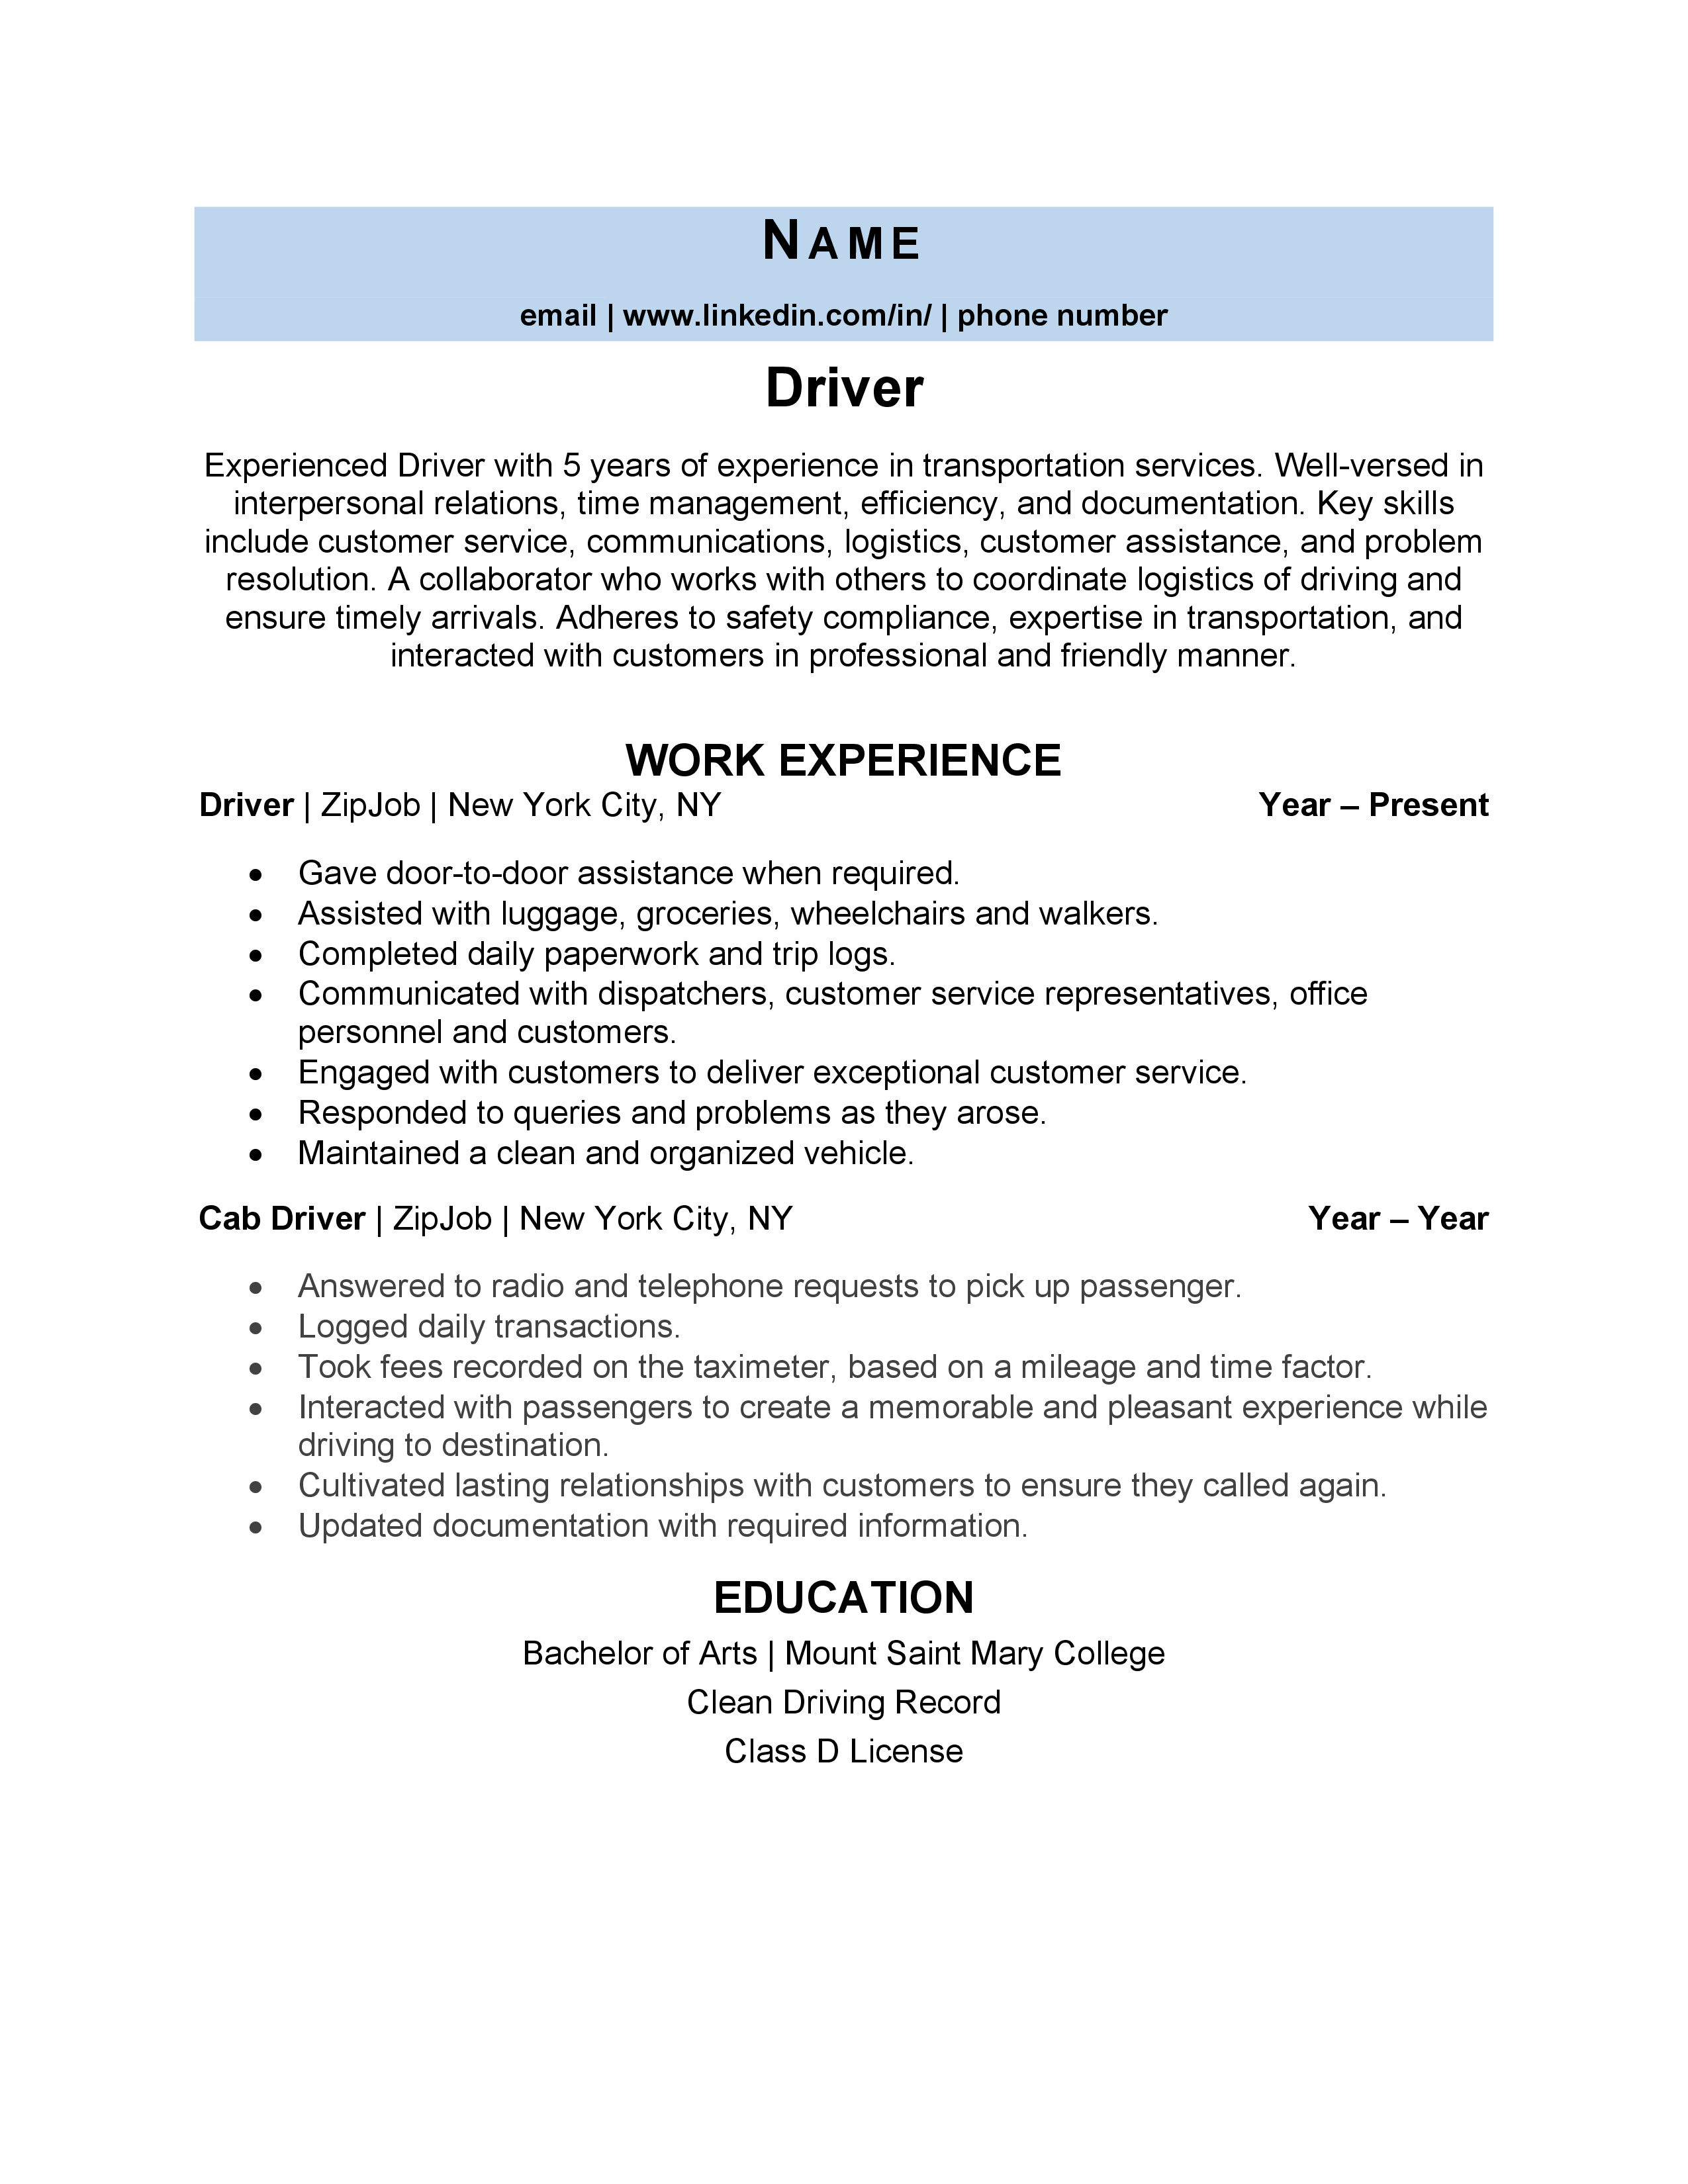 resume examples for driver position